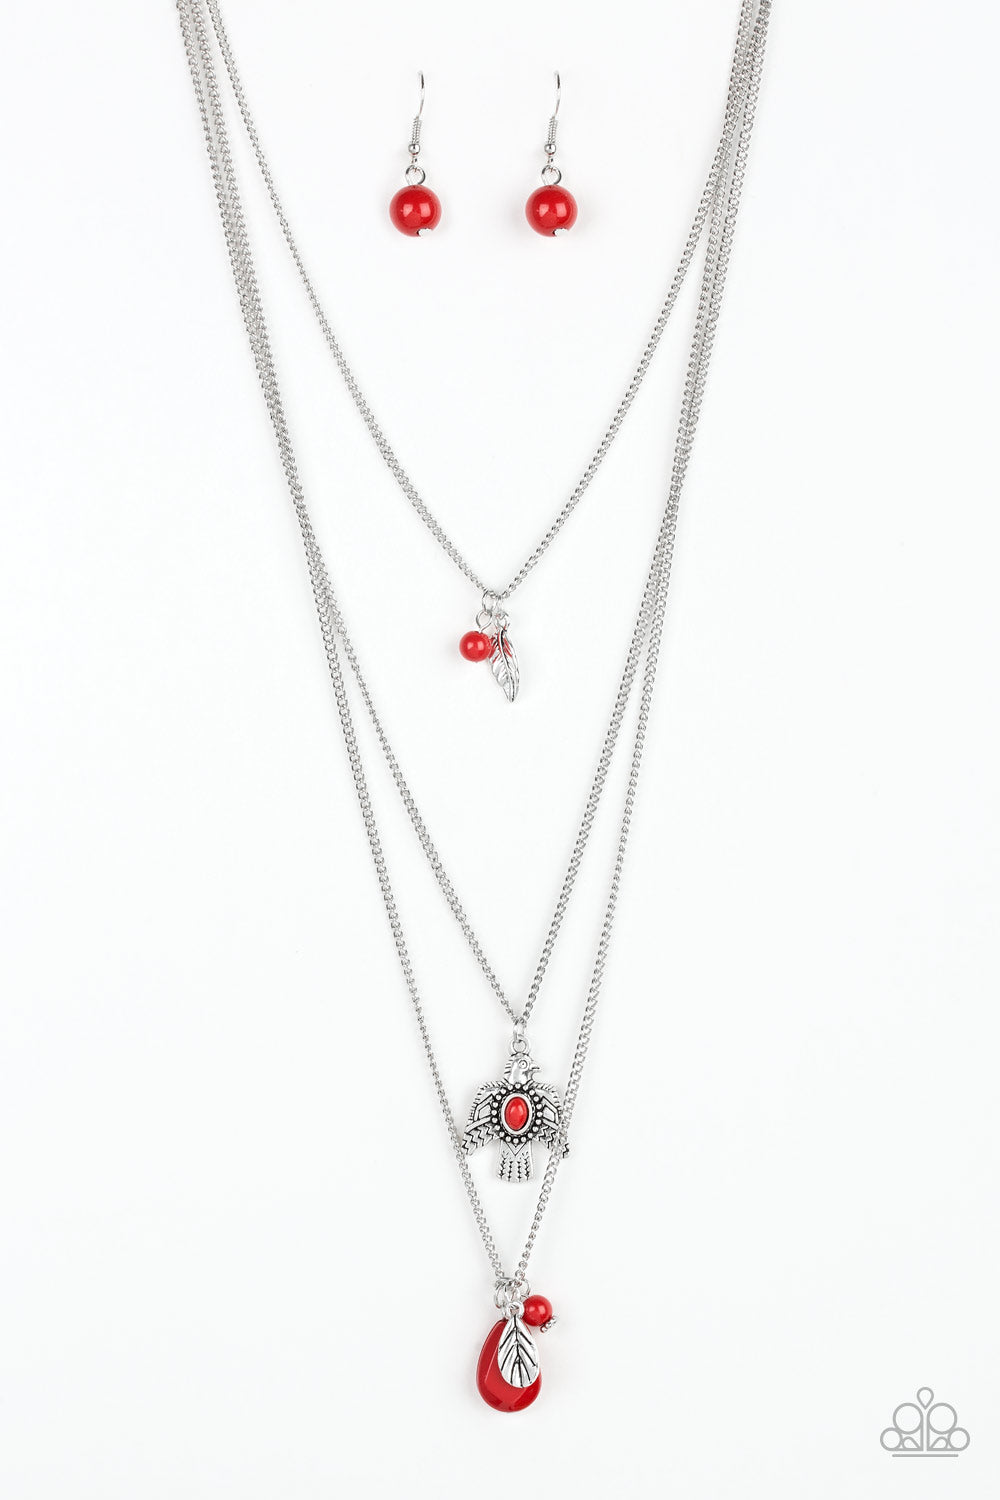 Paparazzi - Soar With The Eagles - Red Necklace